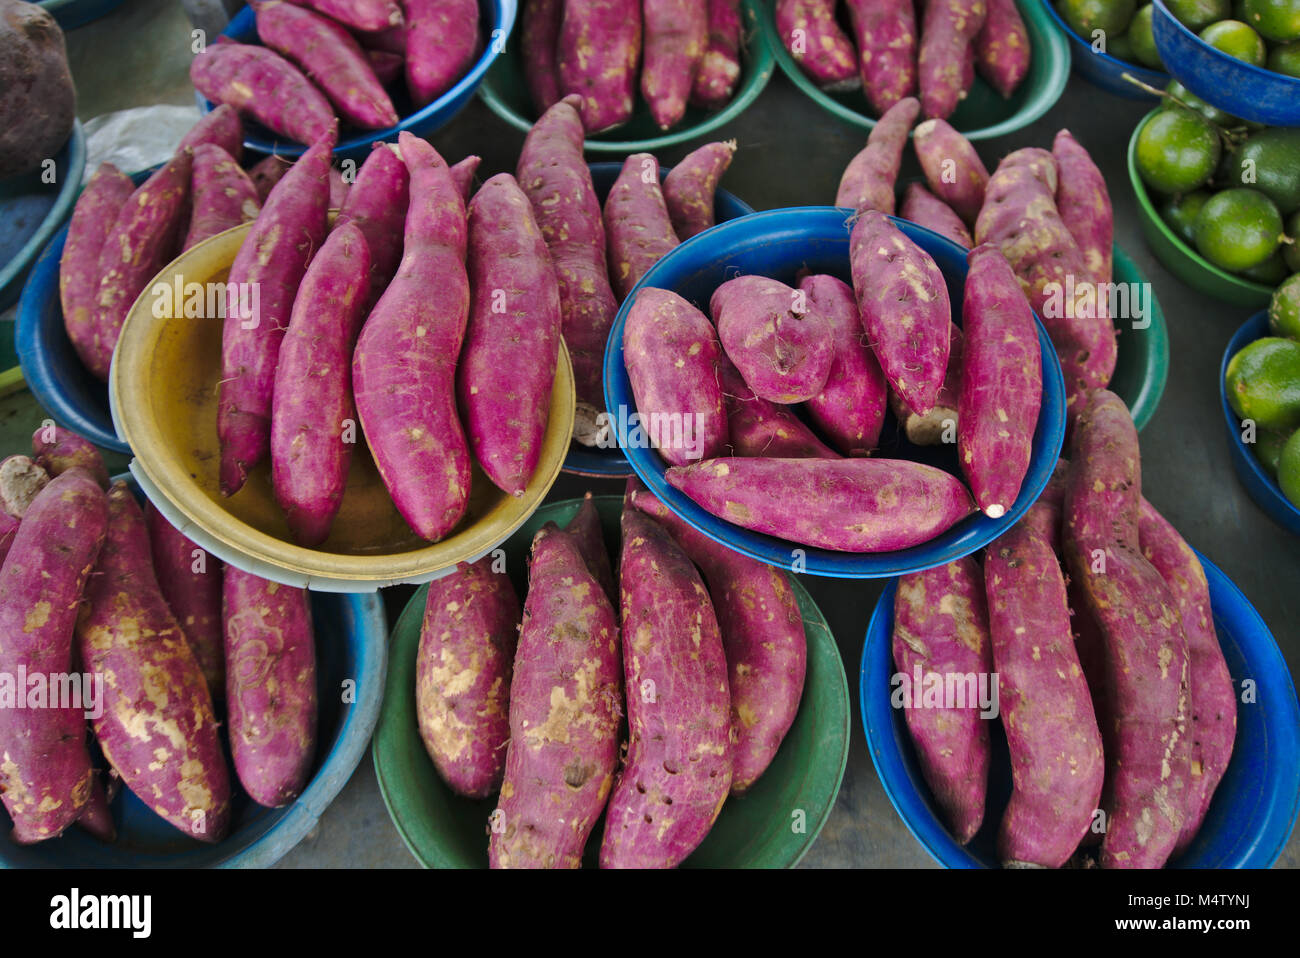 Red sweet potato and lime at a farmers market stall. Stock Photo